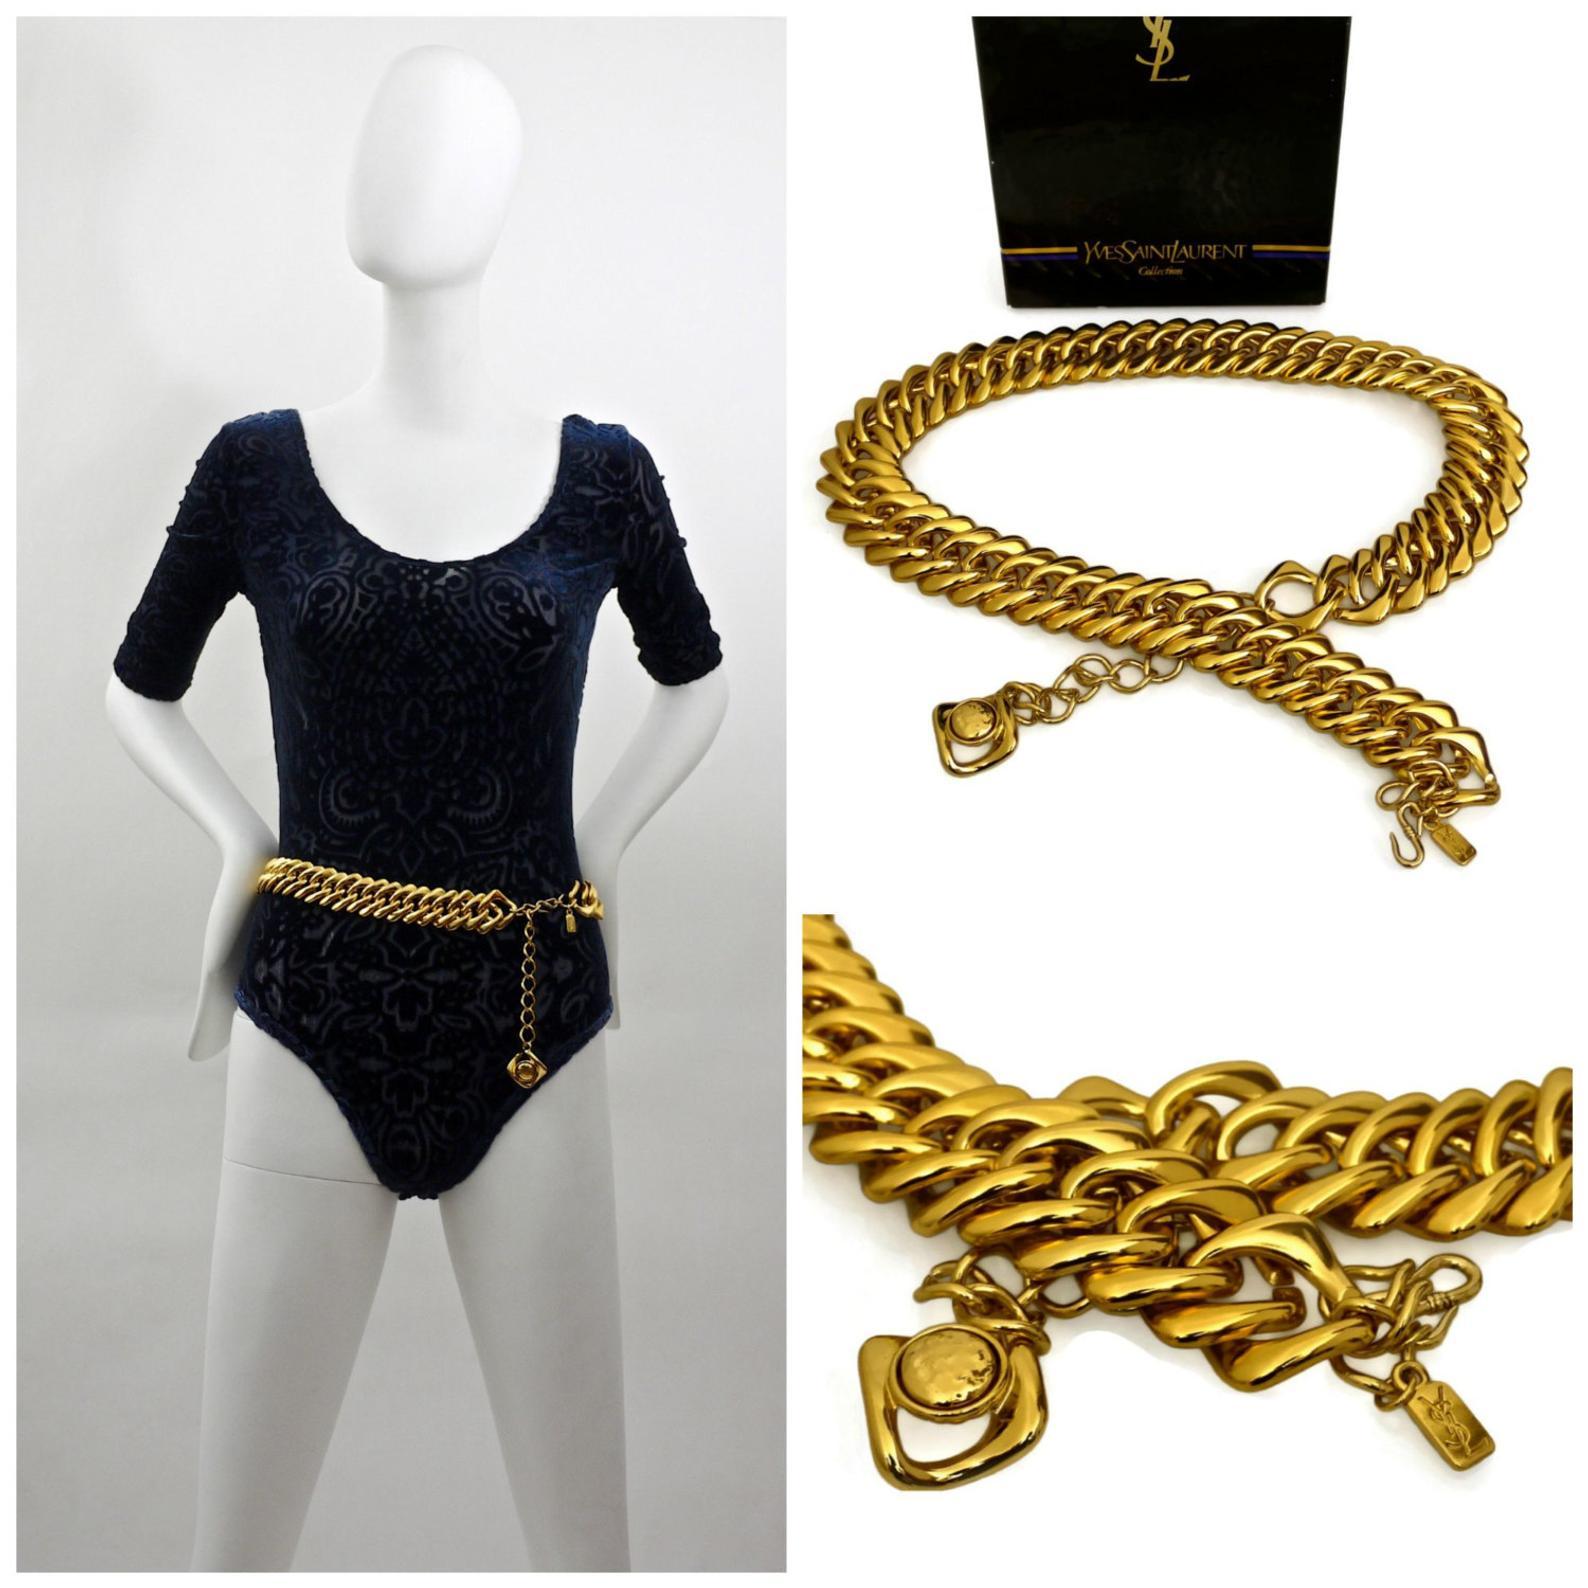 Vintage YVES SAINT LAURENT Chunky Chain Necklace Belt

Measurements:
Height: 1 2/8 inches
Wearable Length: 29 inches to 33 4/8 inches

Features:
- 100% Authentic YVES SAINT LAURENT.
- Massive chain in gold tone.
- Metal hang tag is signed YSL Made